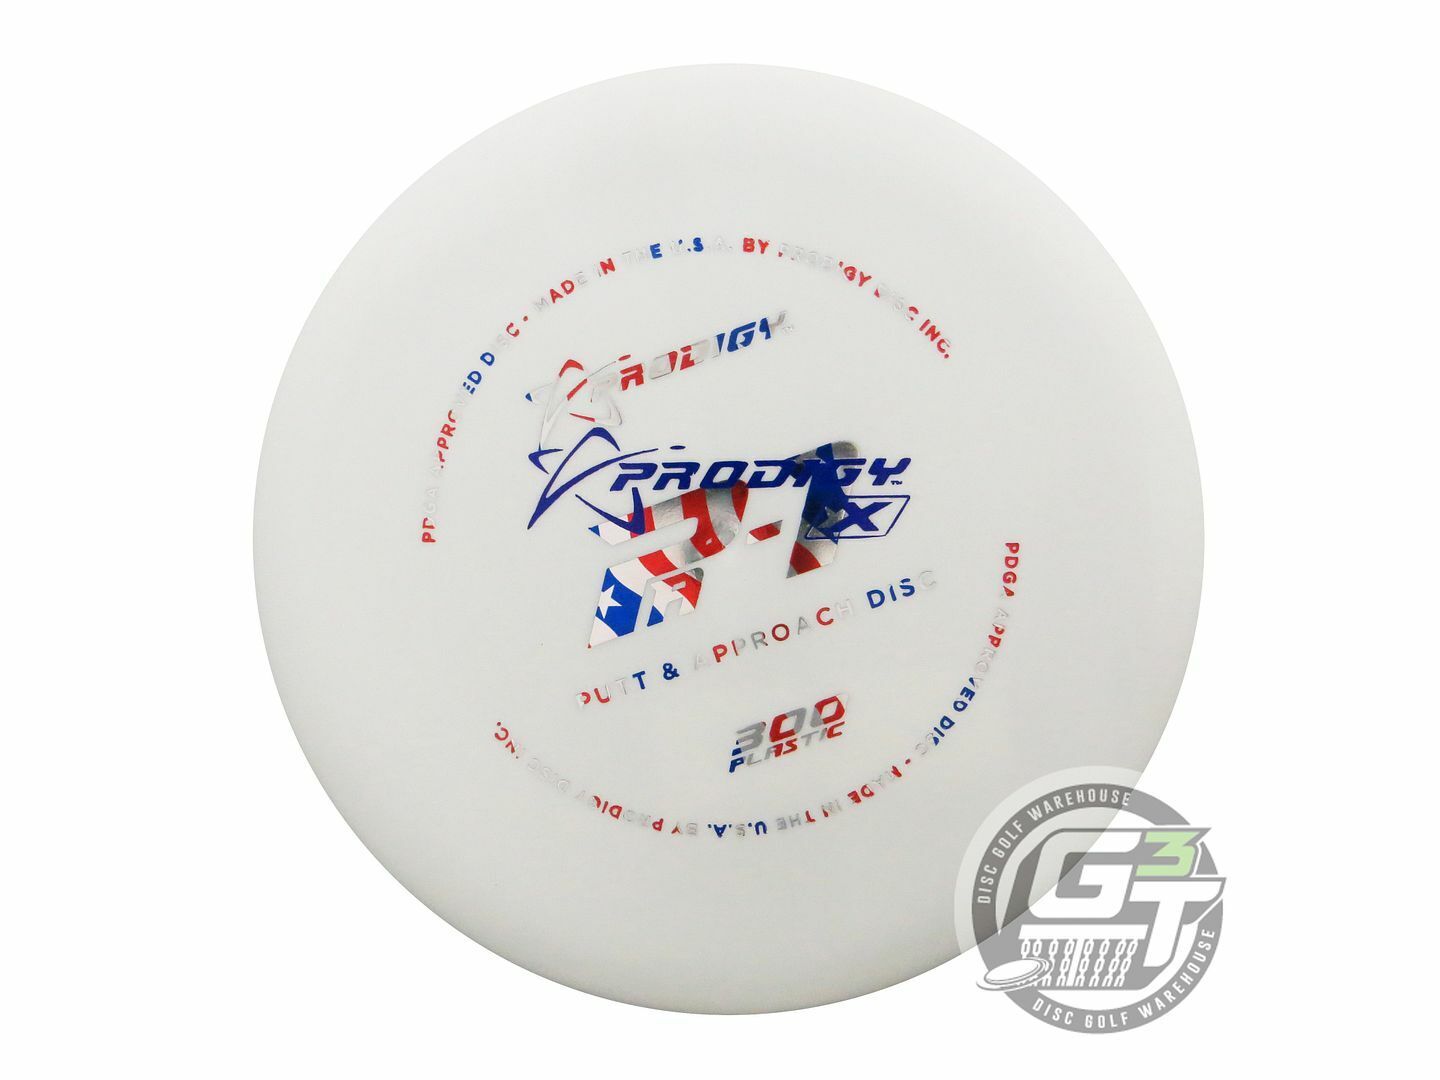 Prodigy Factory Second 300 Series PA1 Putter Golf Disc (Individually Listed)